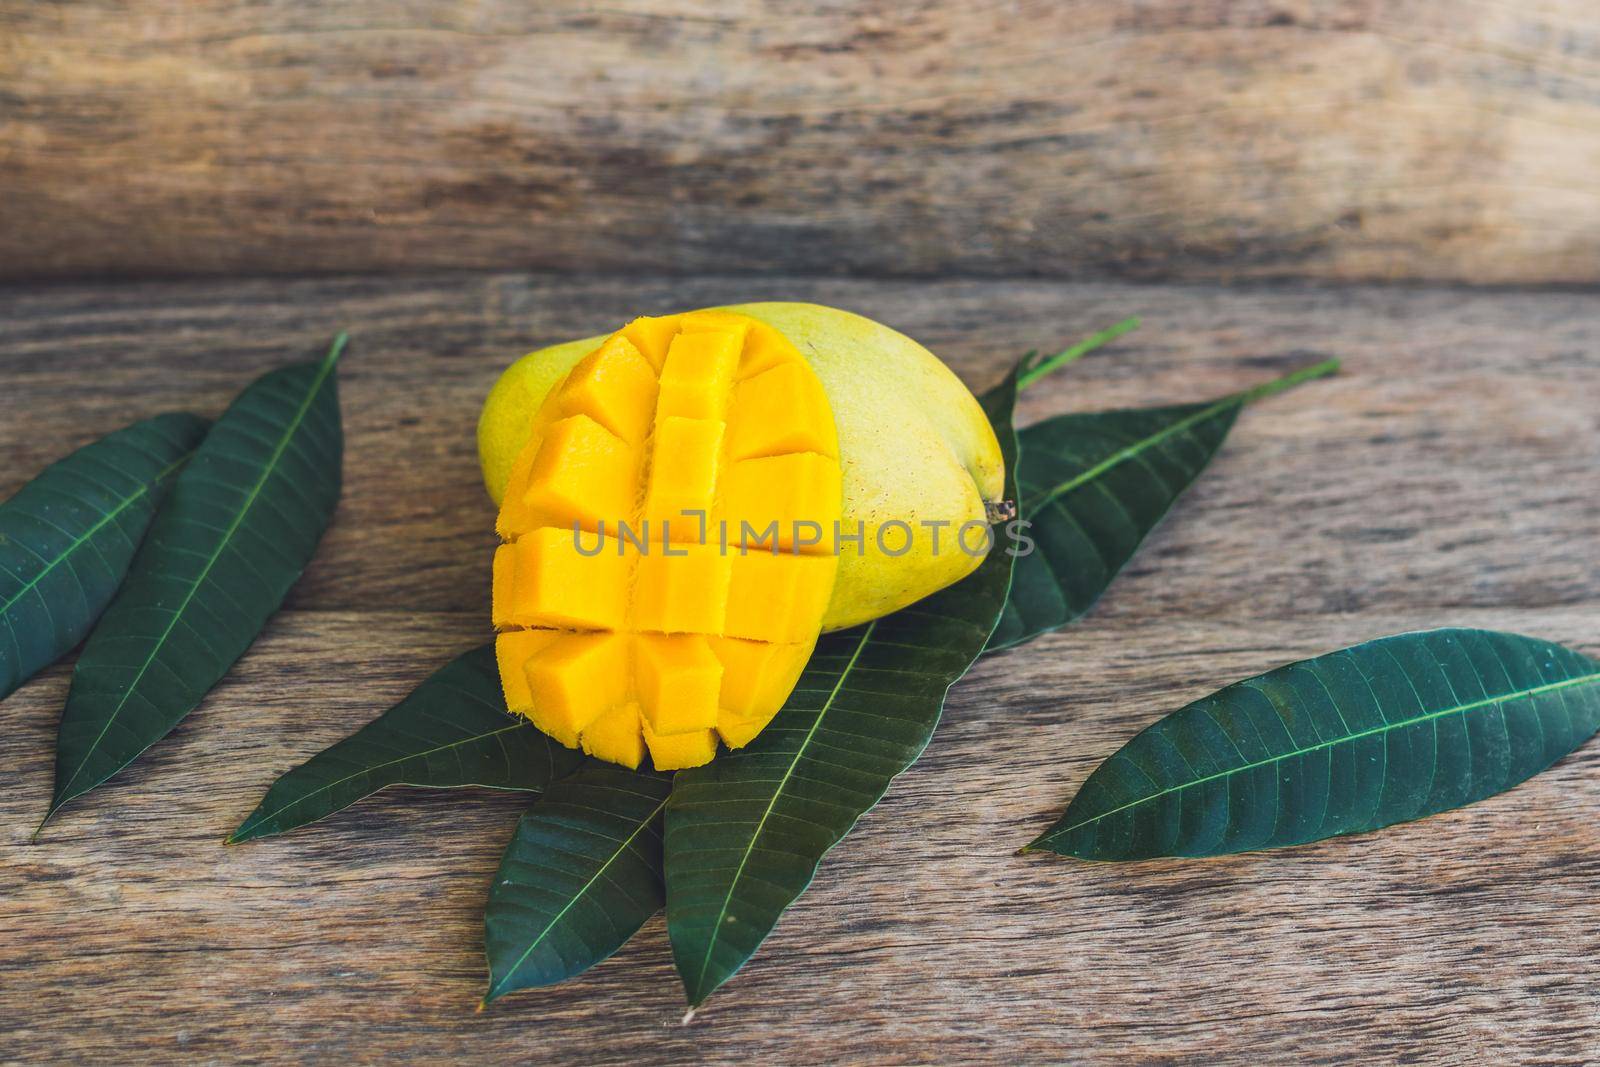 Mango and mango leaves on an old wooden background.